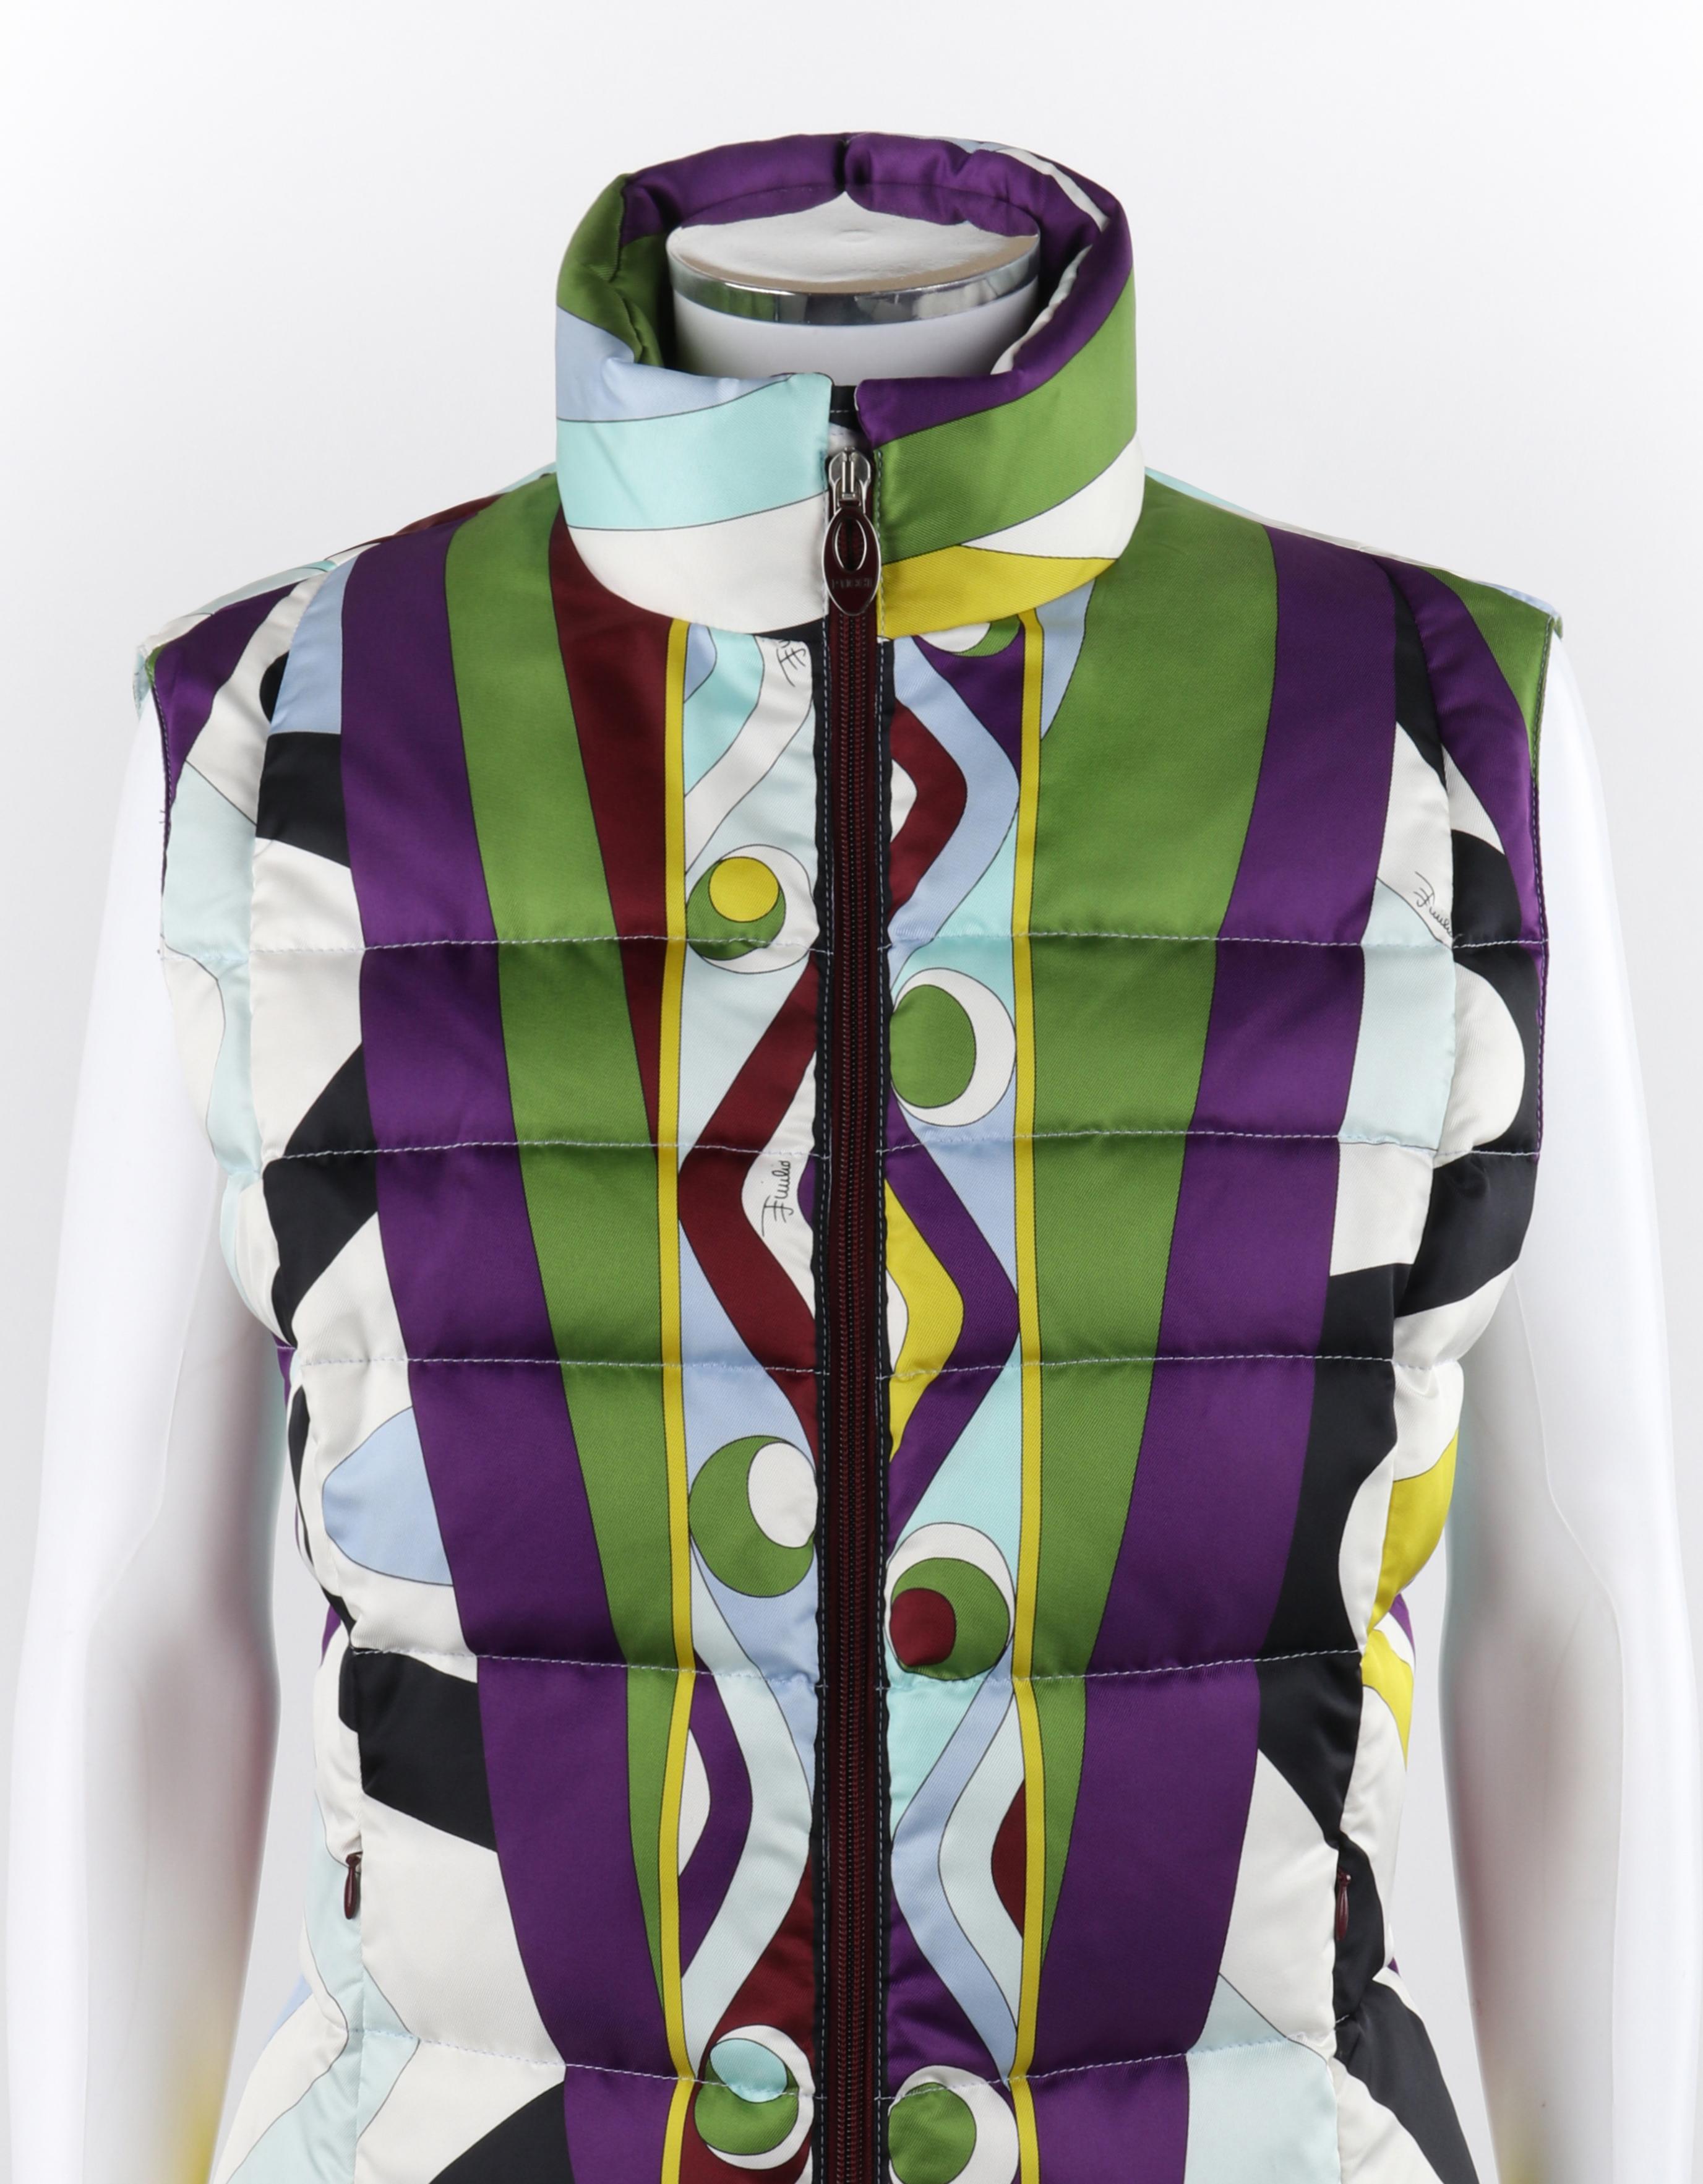 EMILIO PUCCI F/W 2004 Firenze Multicolor Op Art Quilted Puffer Ski Vest Jacket

Brand / Manufacturer: Emilio Pucci
Collection: F/W 2004
Designer: Christian Lacroix
Style: Puffer vest jacket
Color(s): Shades of black, white, purple, blue, yellow,